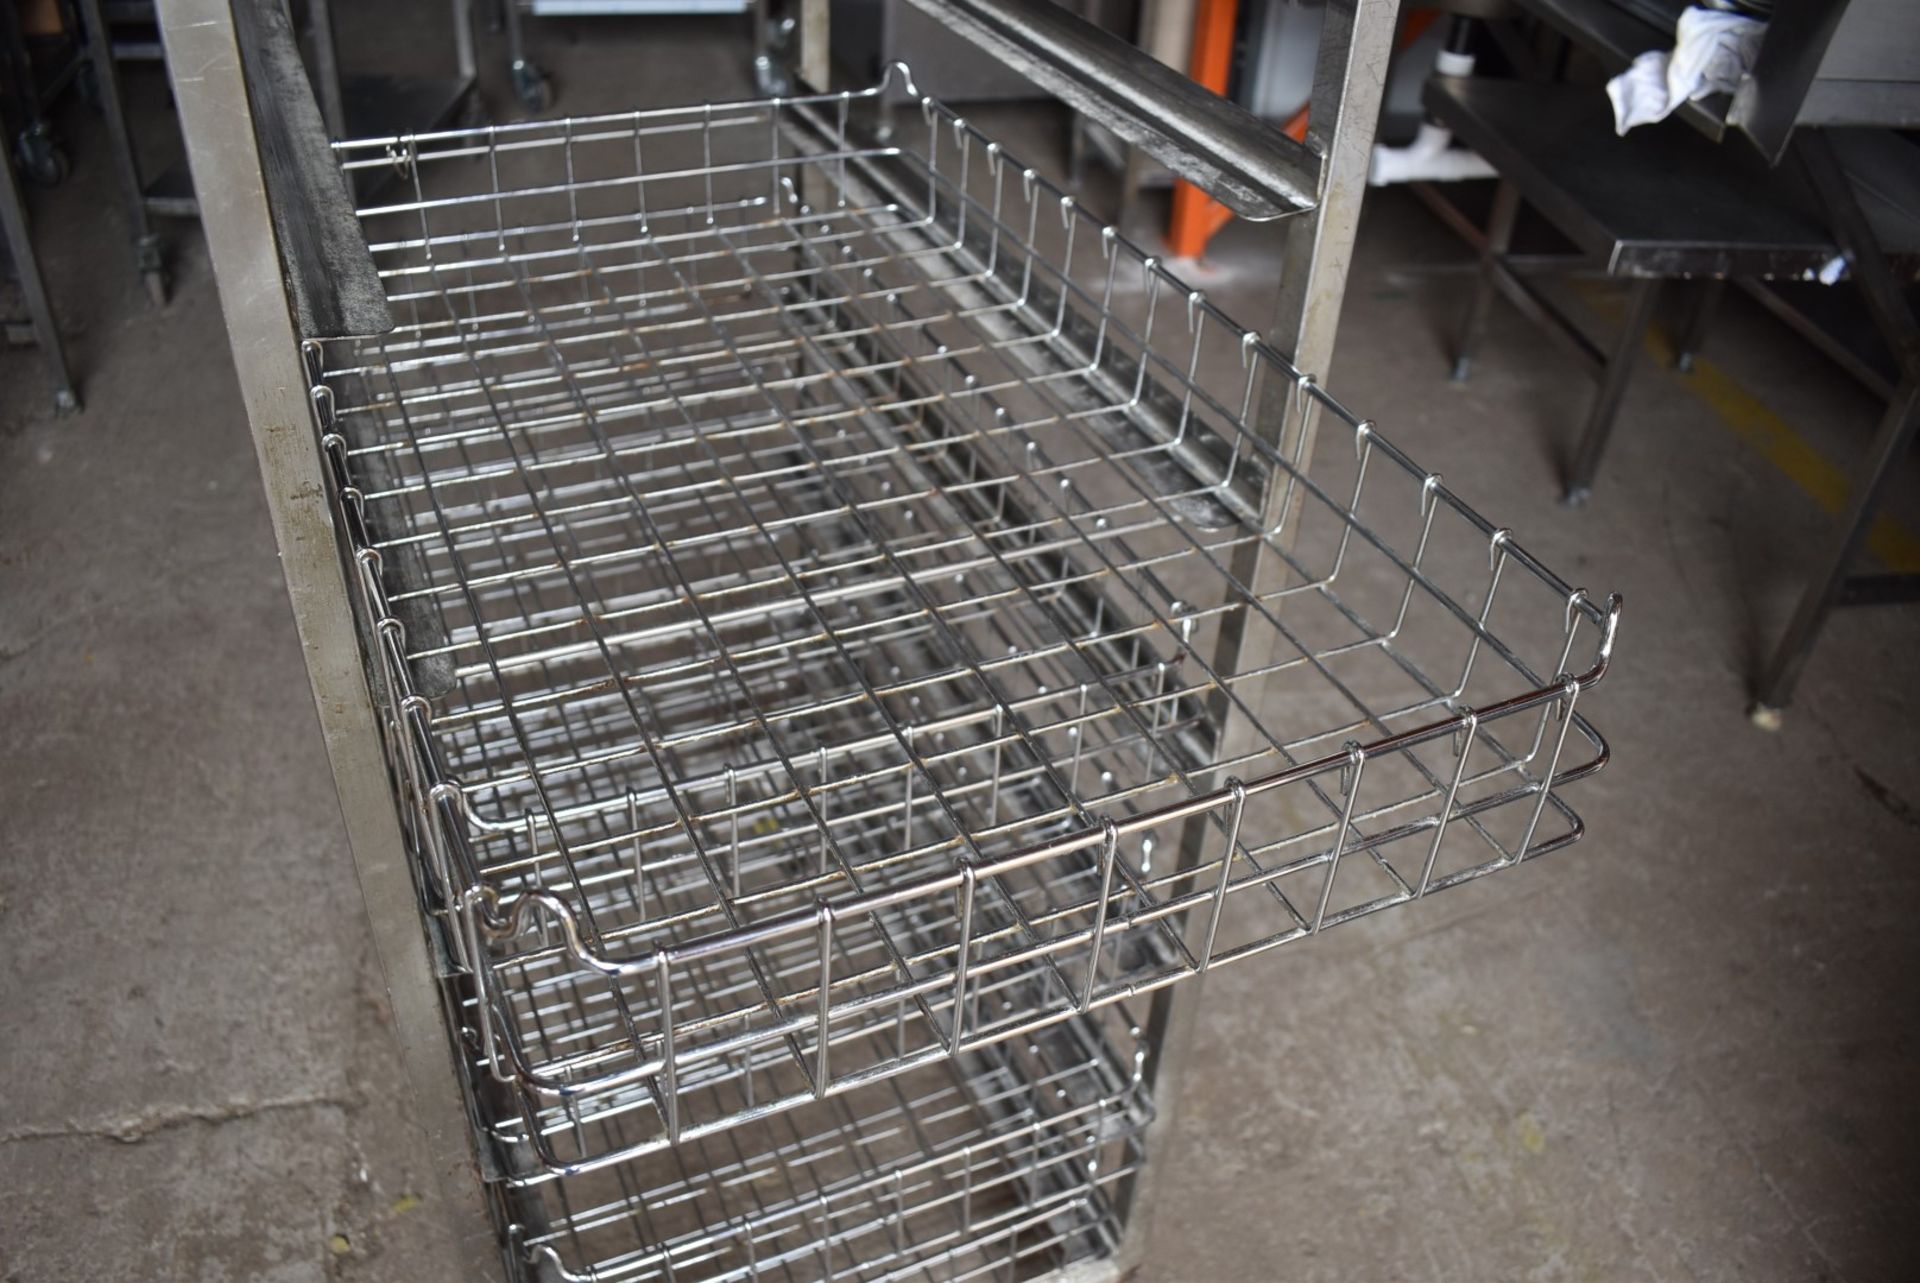 1 x Bakers 11 Tier Mobile Tray Rack With 7 Removable Wire Baskets - Stainless Steel With Castors - - Image 2 of 8